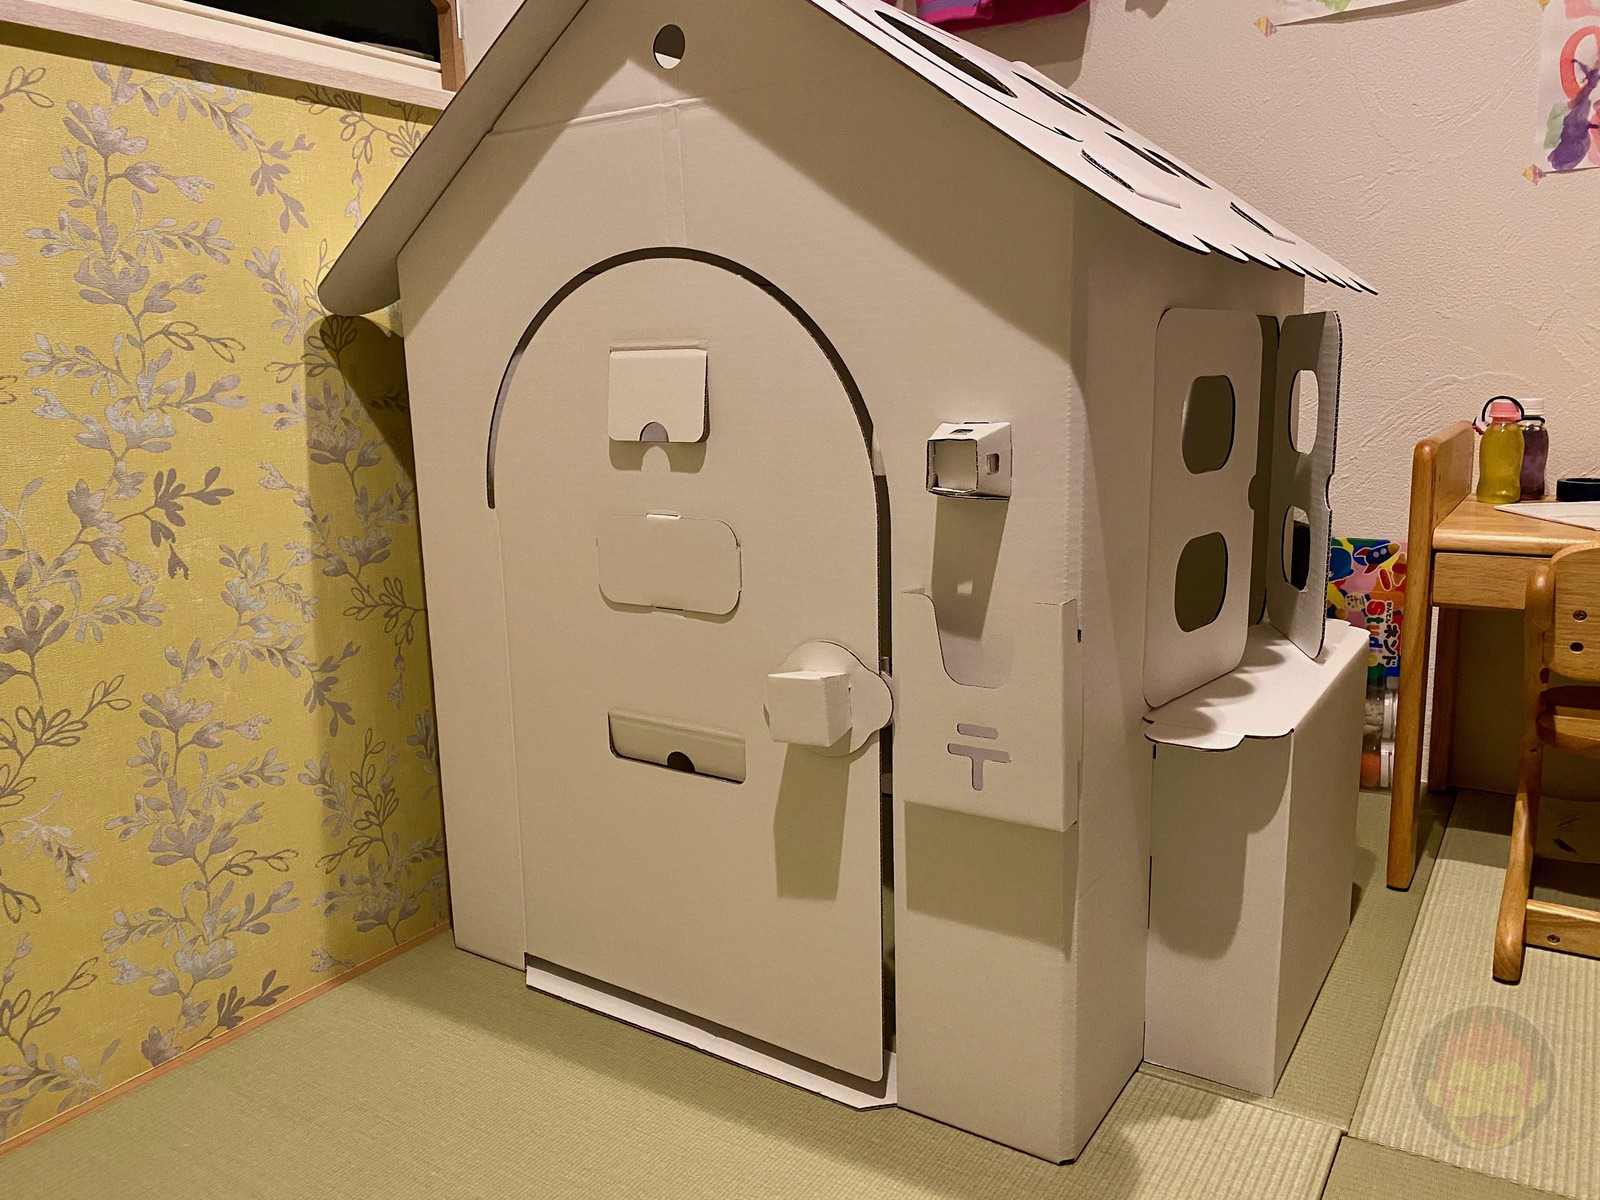 Cardboard-house-for-my-daughter-02.jpeg